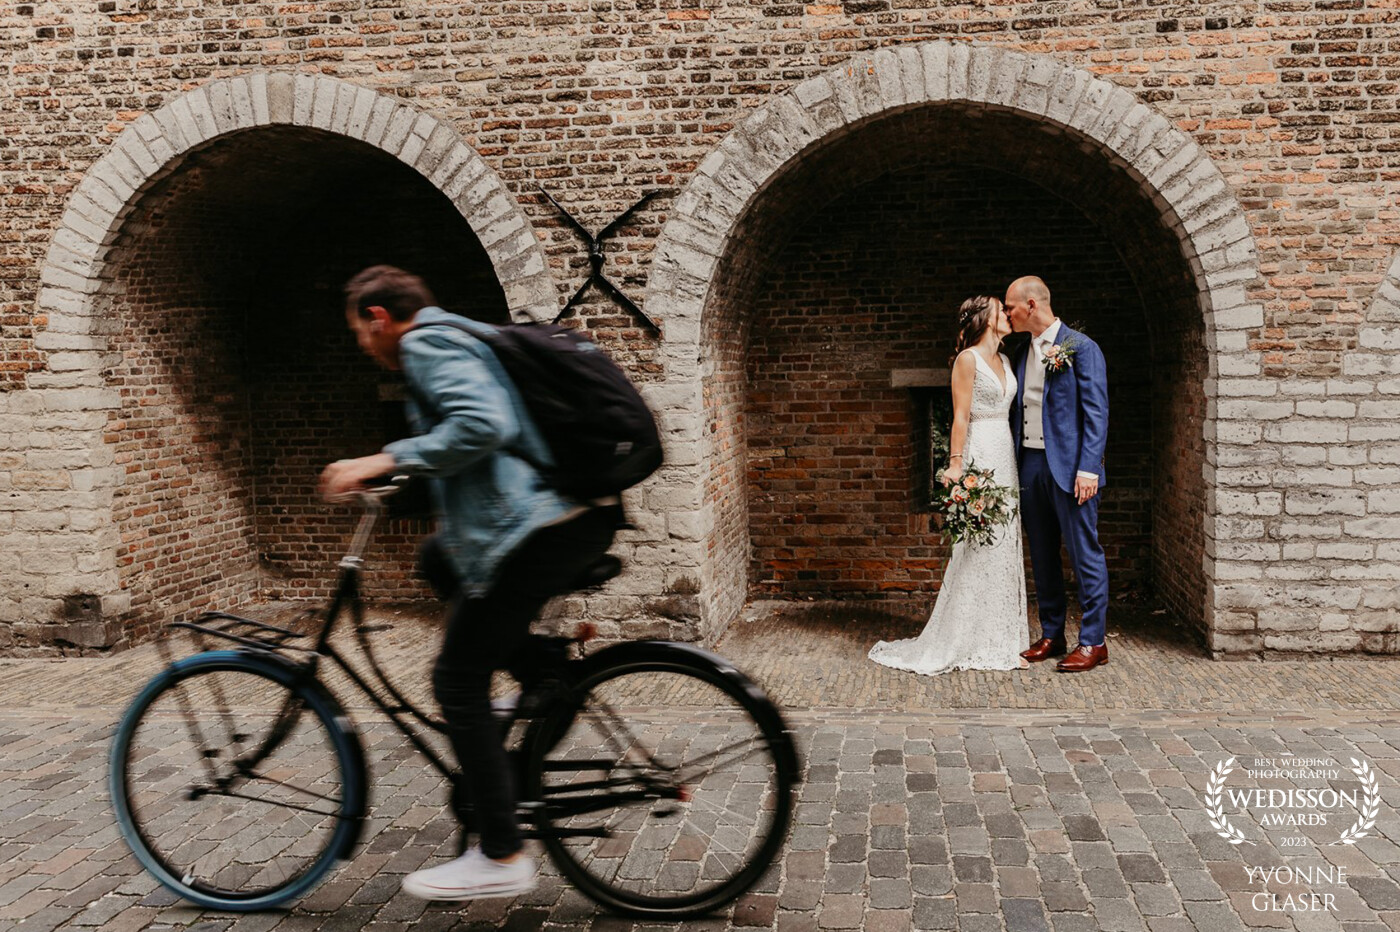 Getting married in your beautiful city of Delft. That urban street scene must of course be reflected in the photos to really tell your story.